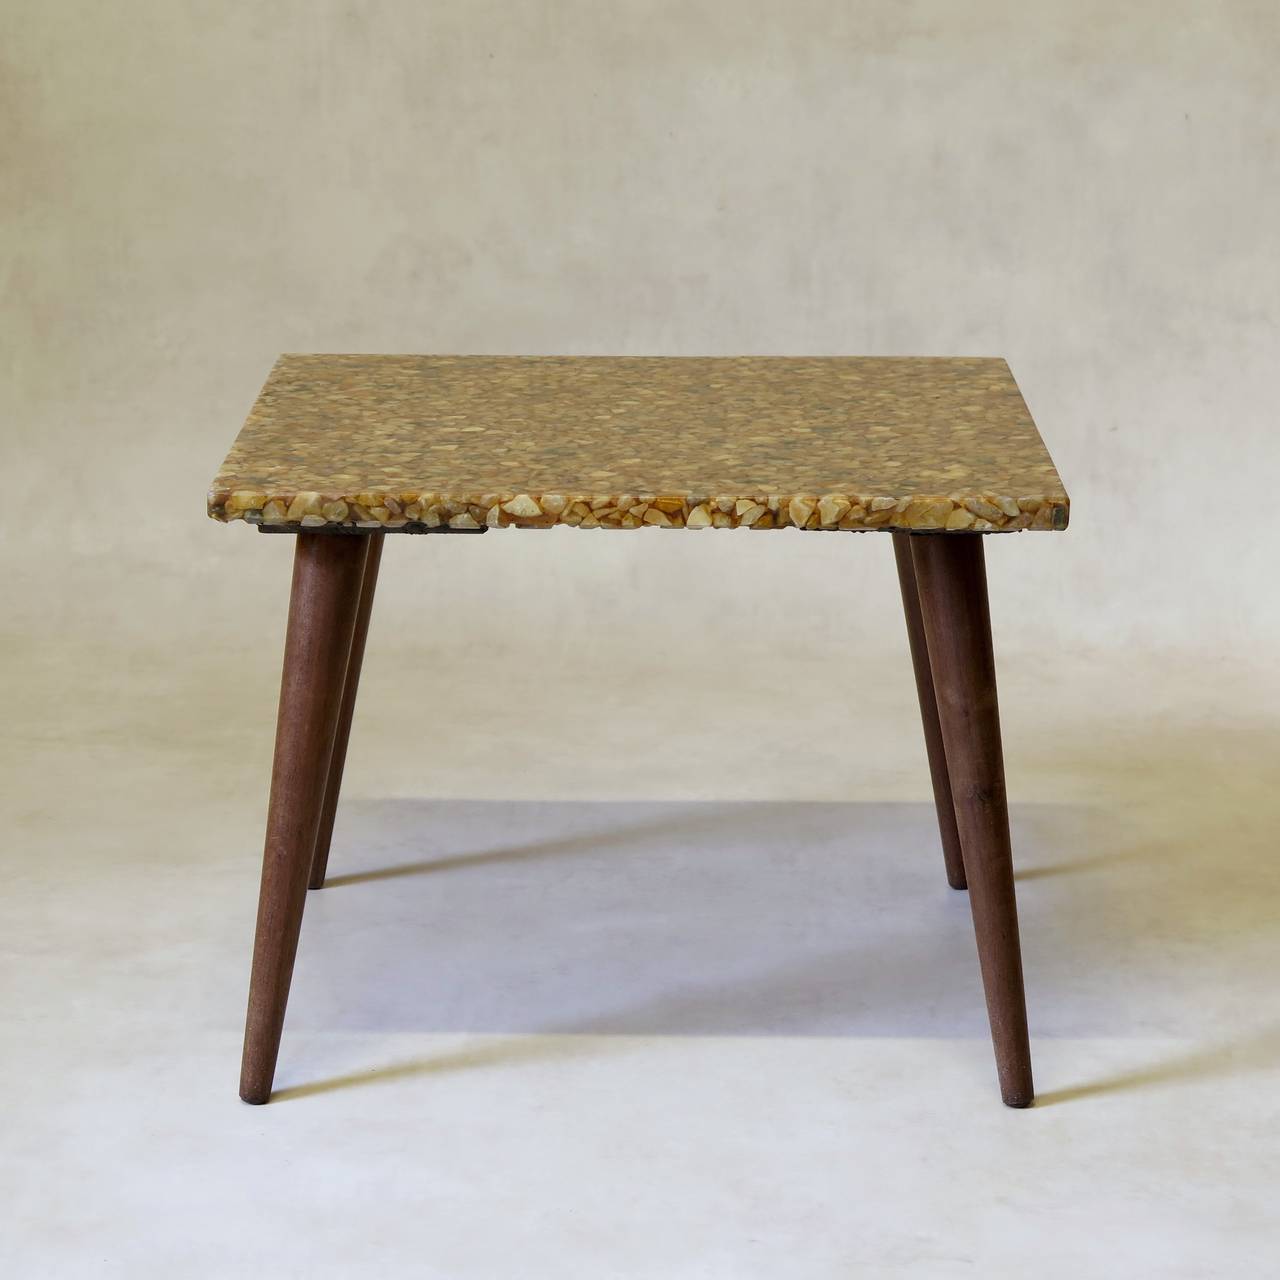 Unusual and wonderful pair of mid-century side tables with square tops made of small pebbles set in resin, raised on elegant and minimalist splayed and tapering legs.